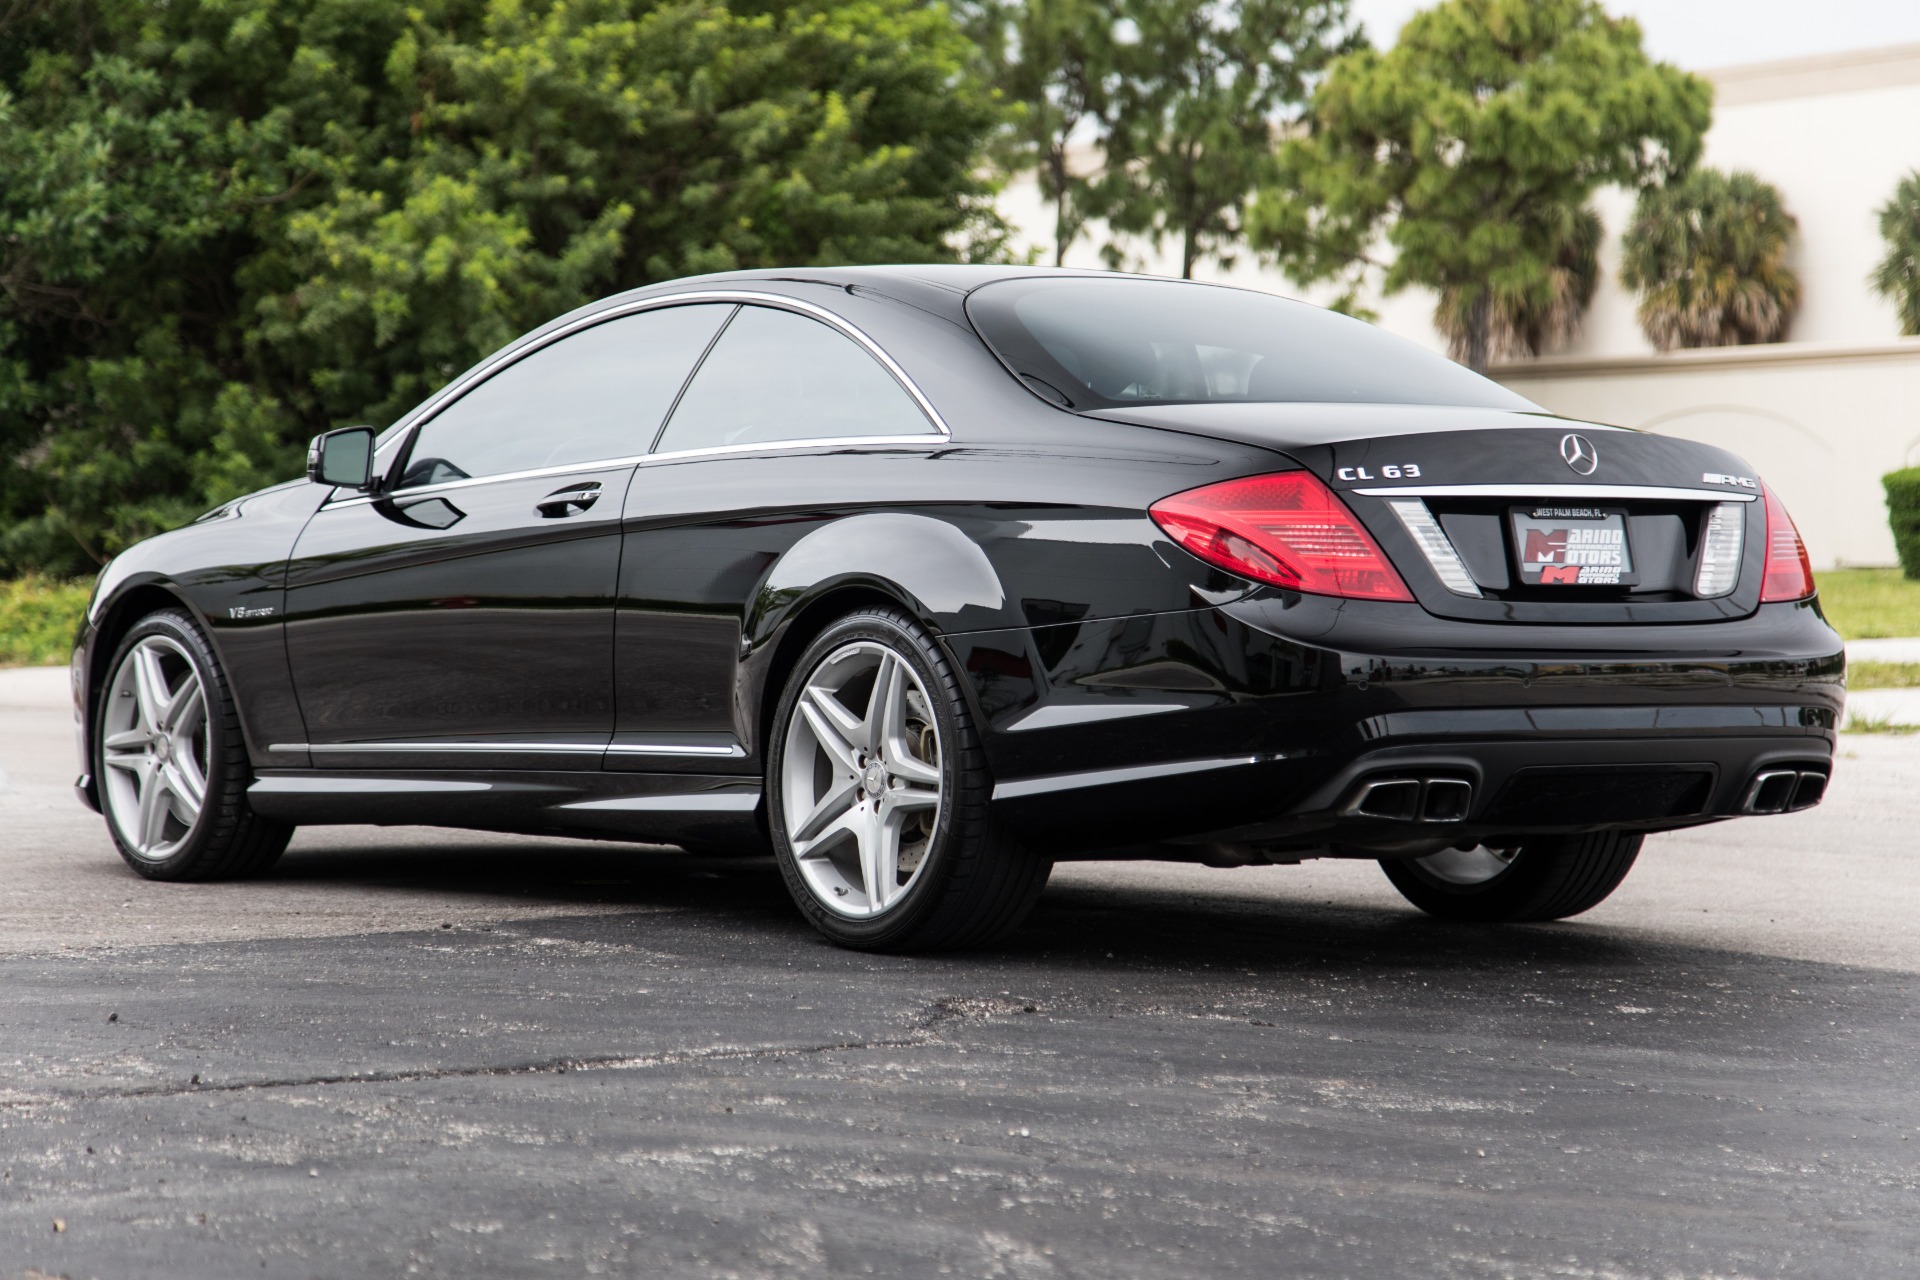 Used 2012 Mercedes Benz Cl Class Cl 63 Amg For Sale 44 900 Marino Performance Motors Stock 028883